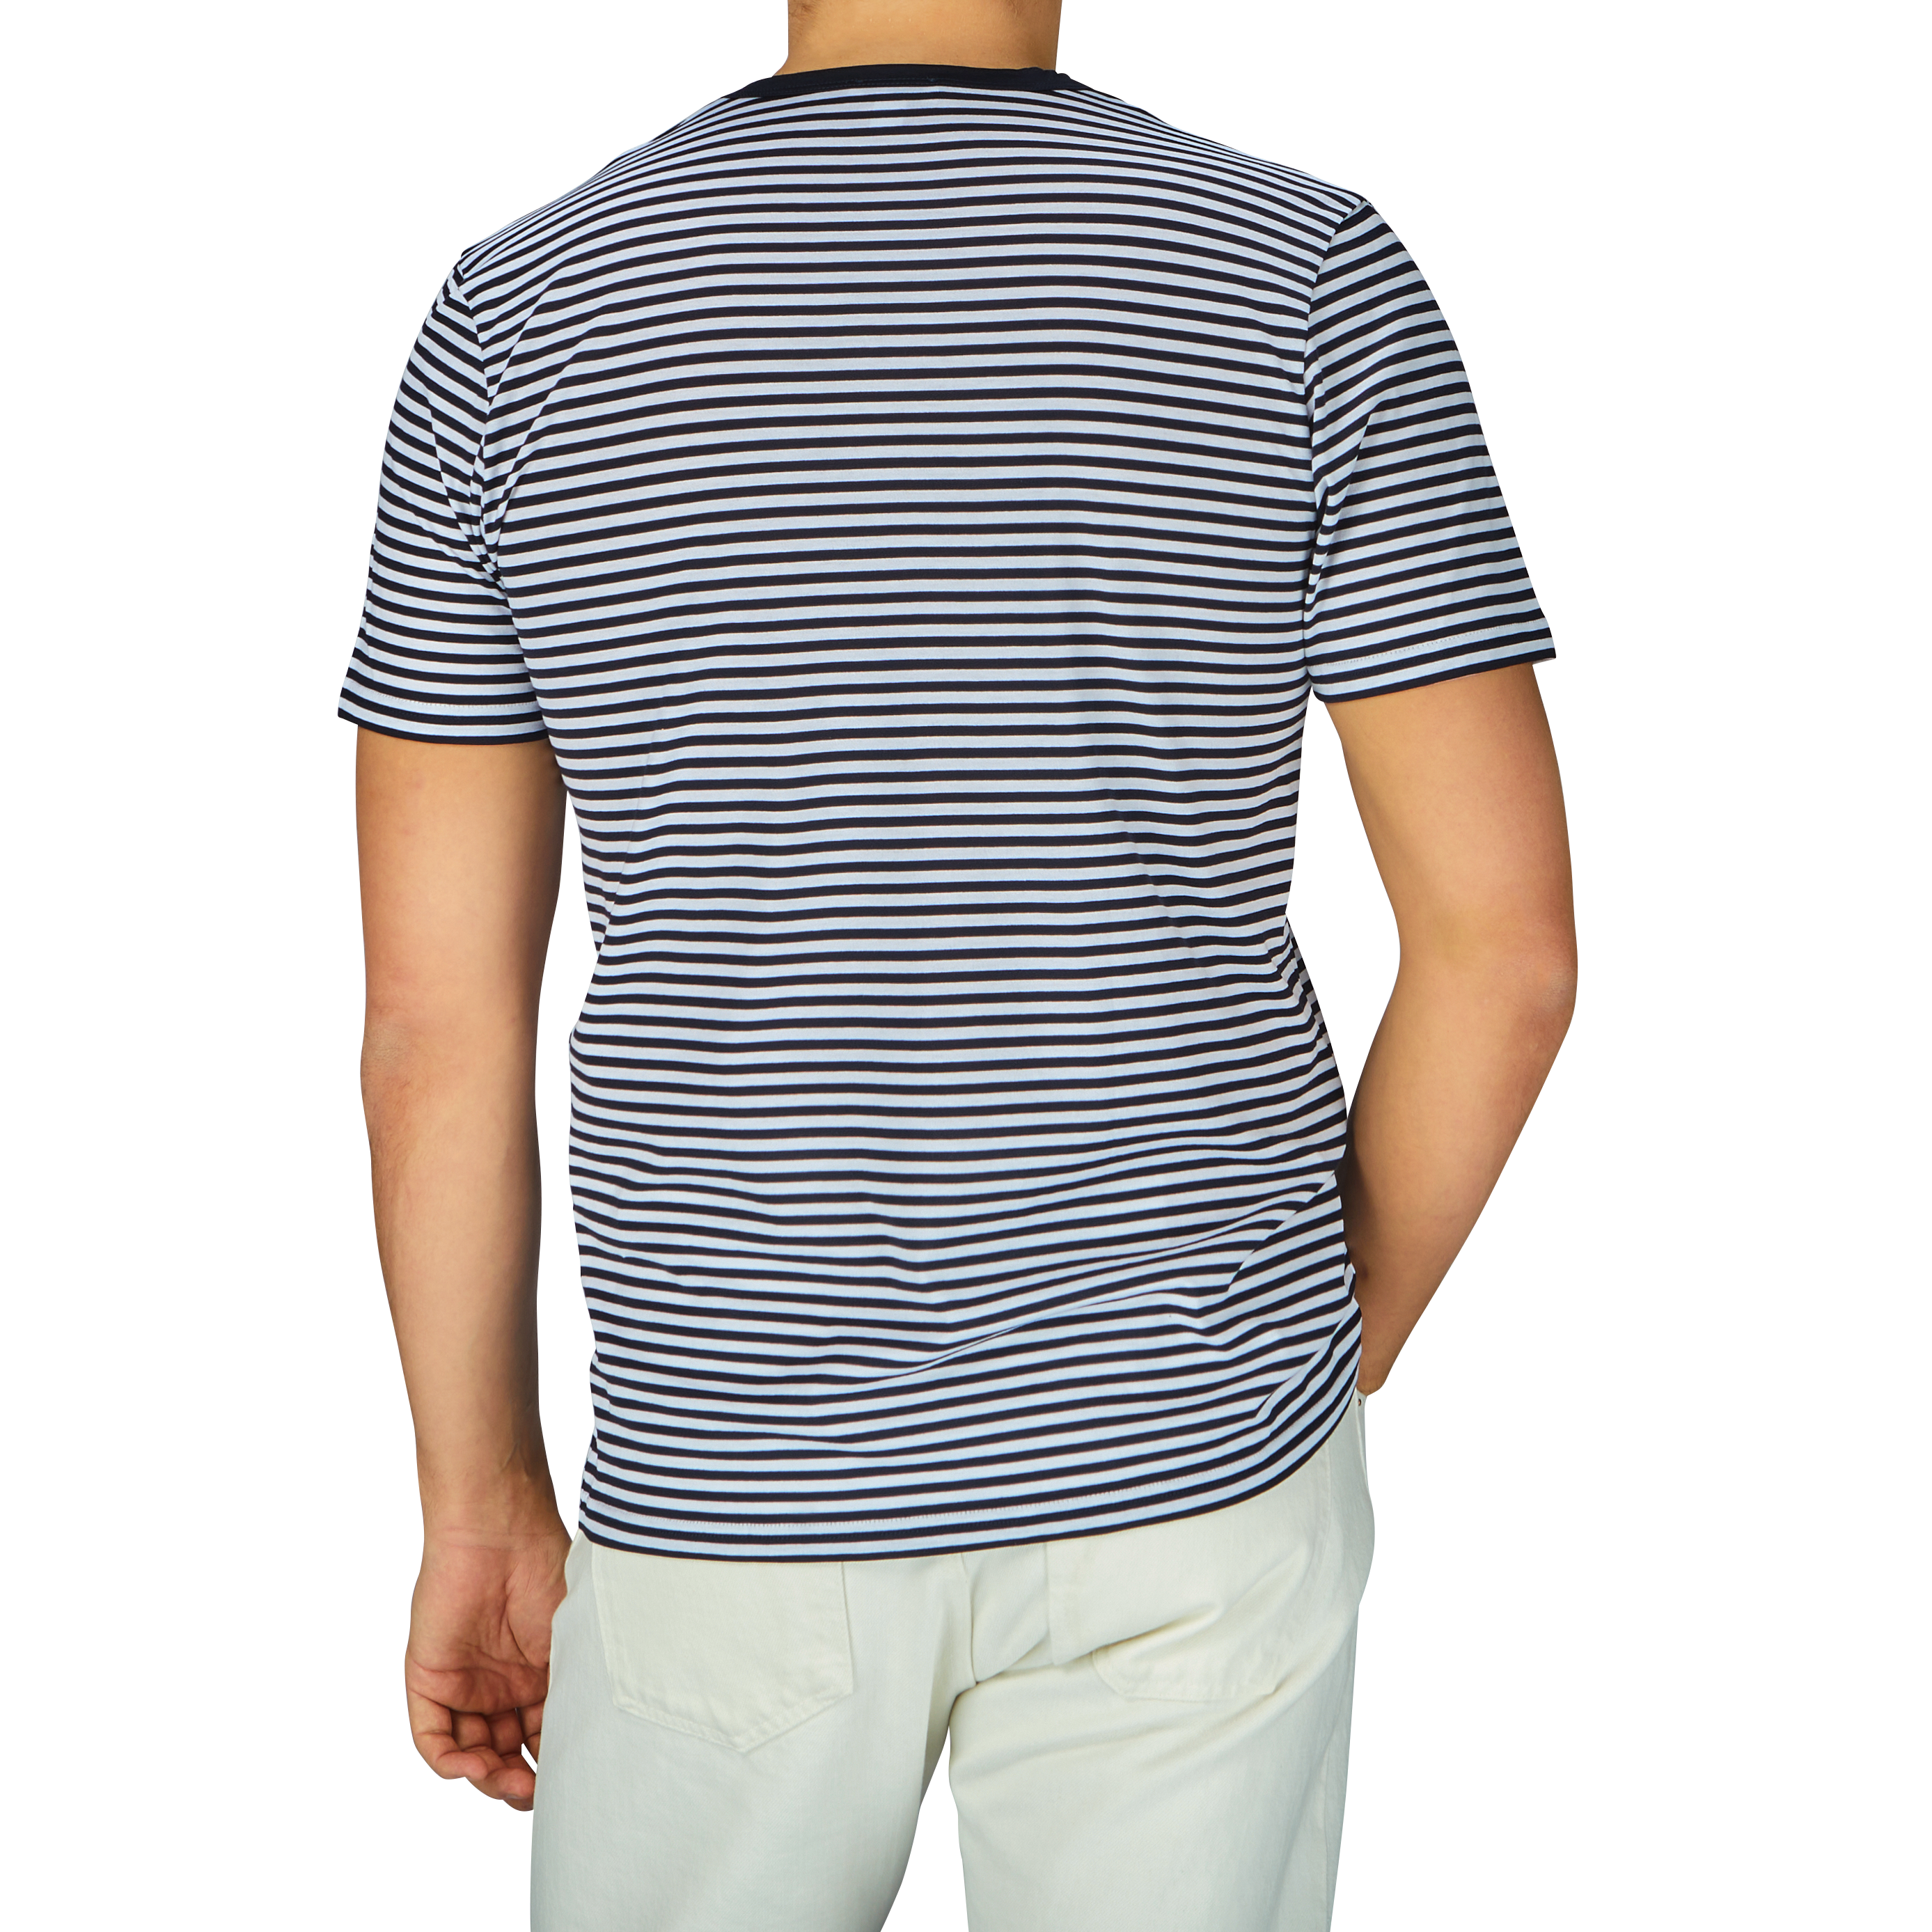 The man is seen wearing a comfortable Navy White Striped Classic Cotton T-Shirt from Sunspel.